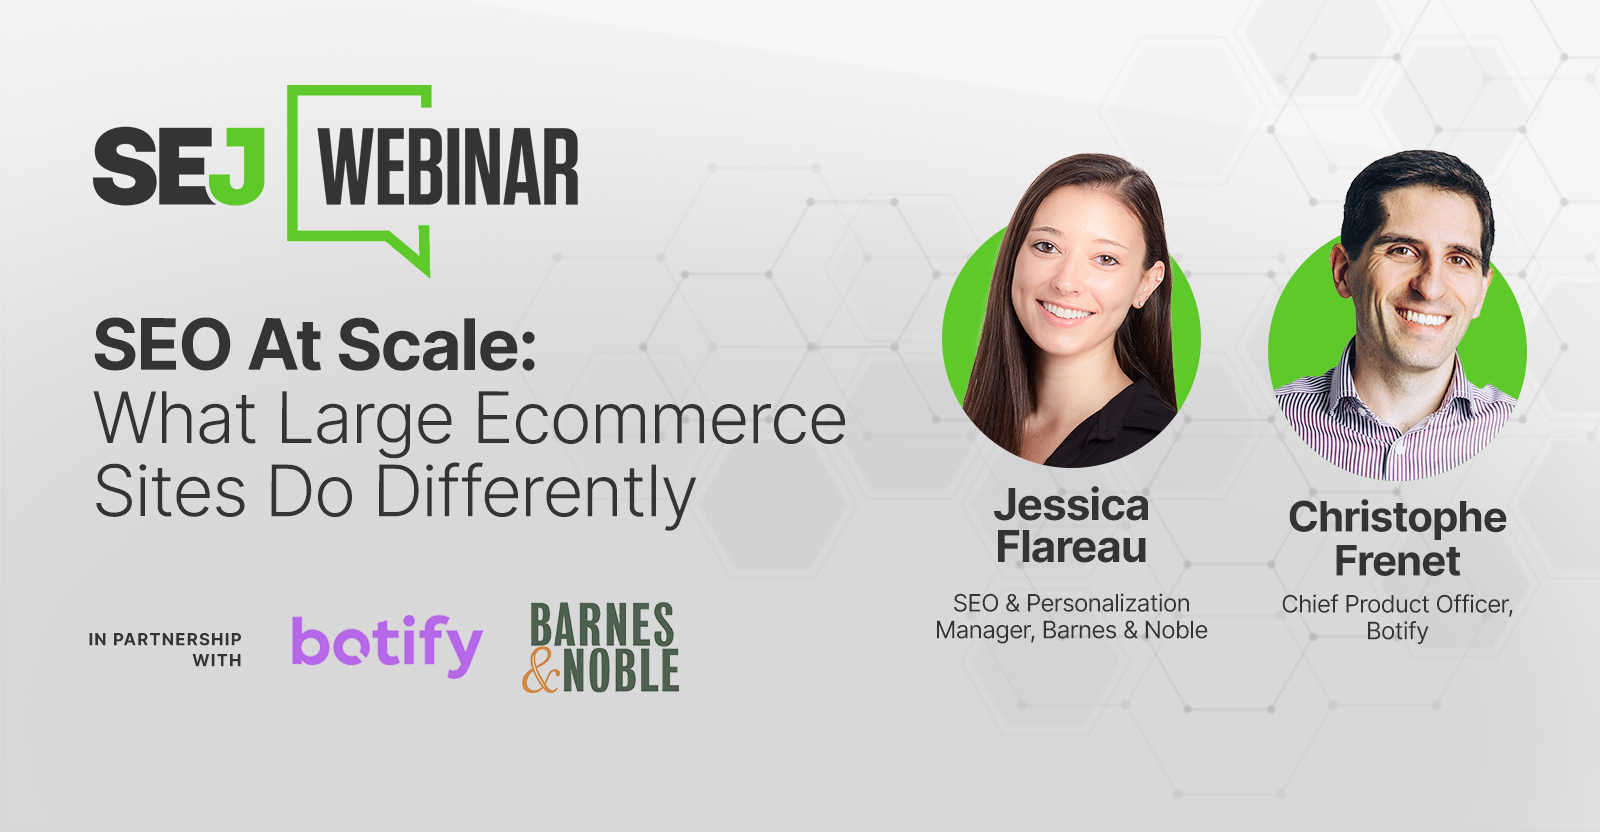 SEO At Scale: What Large Ecommerce Sites Do Differently Webinar